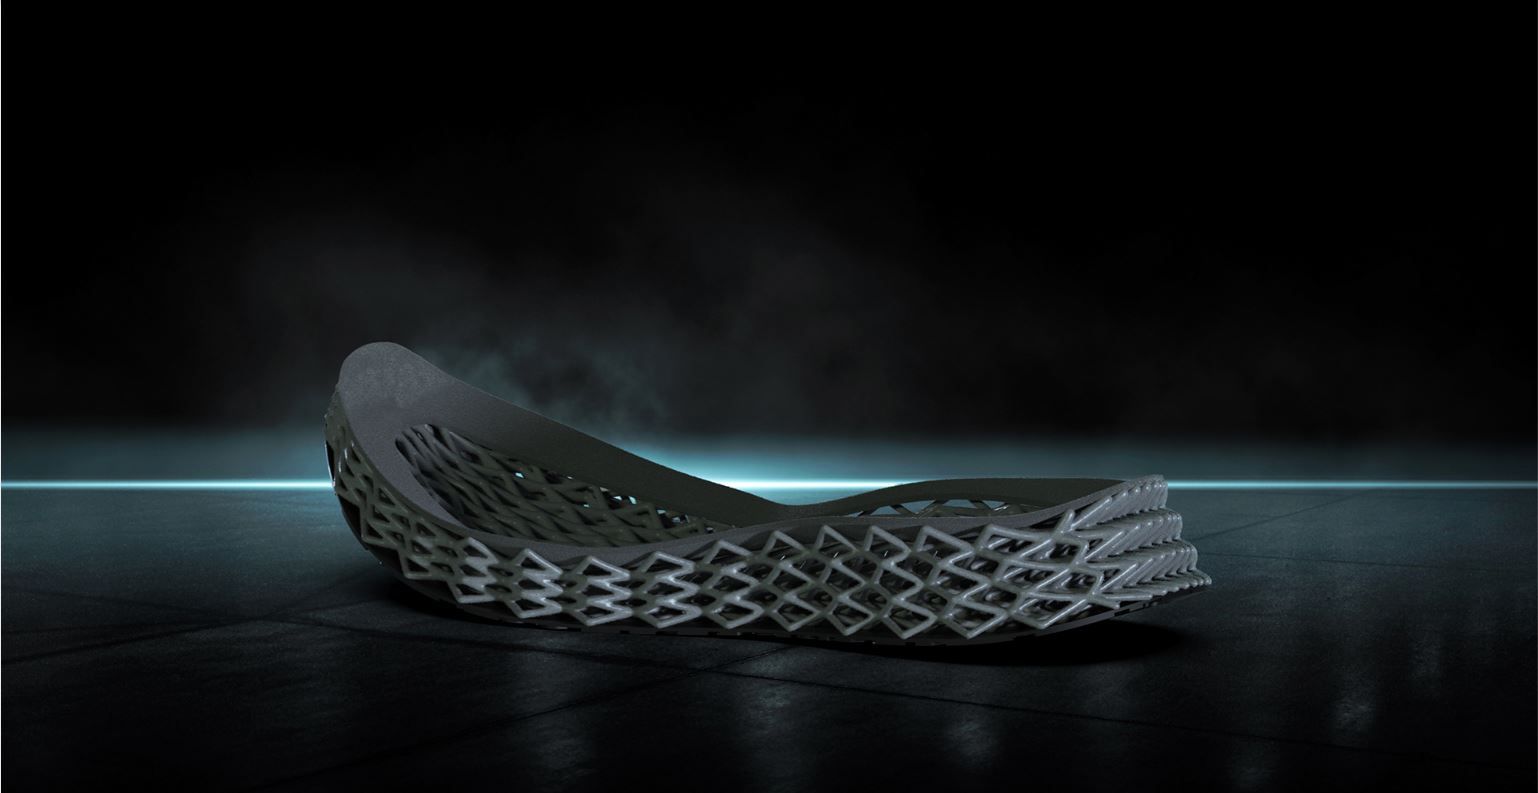 Visualisation of parametric patterns for the sole of Inpulsa shoes by Marco Merafina